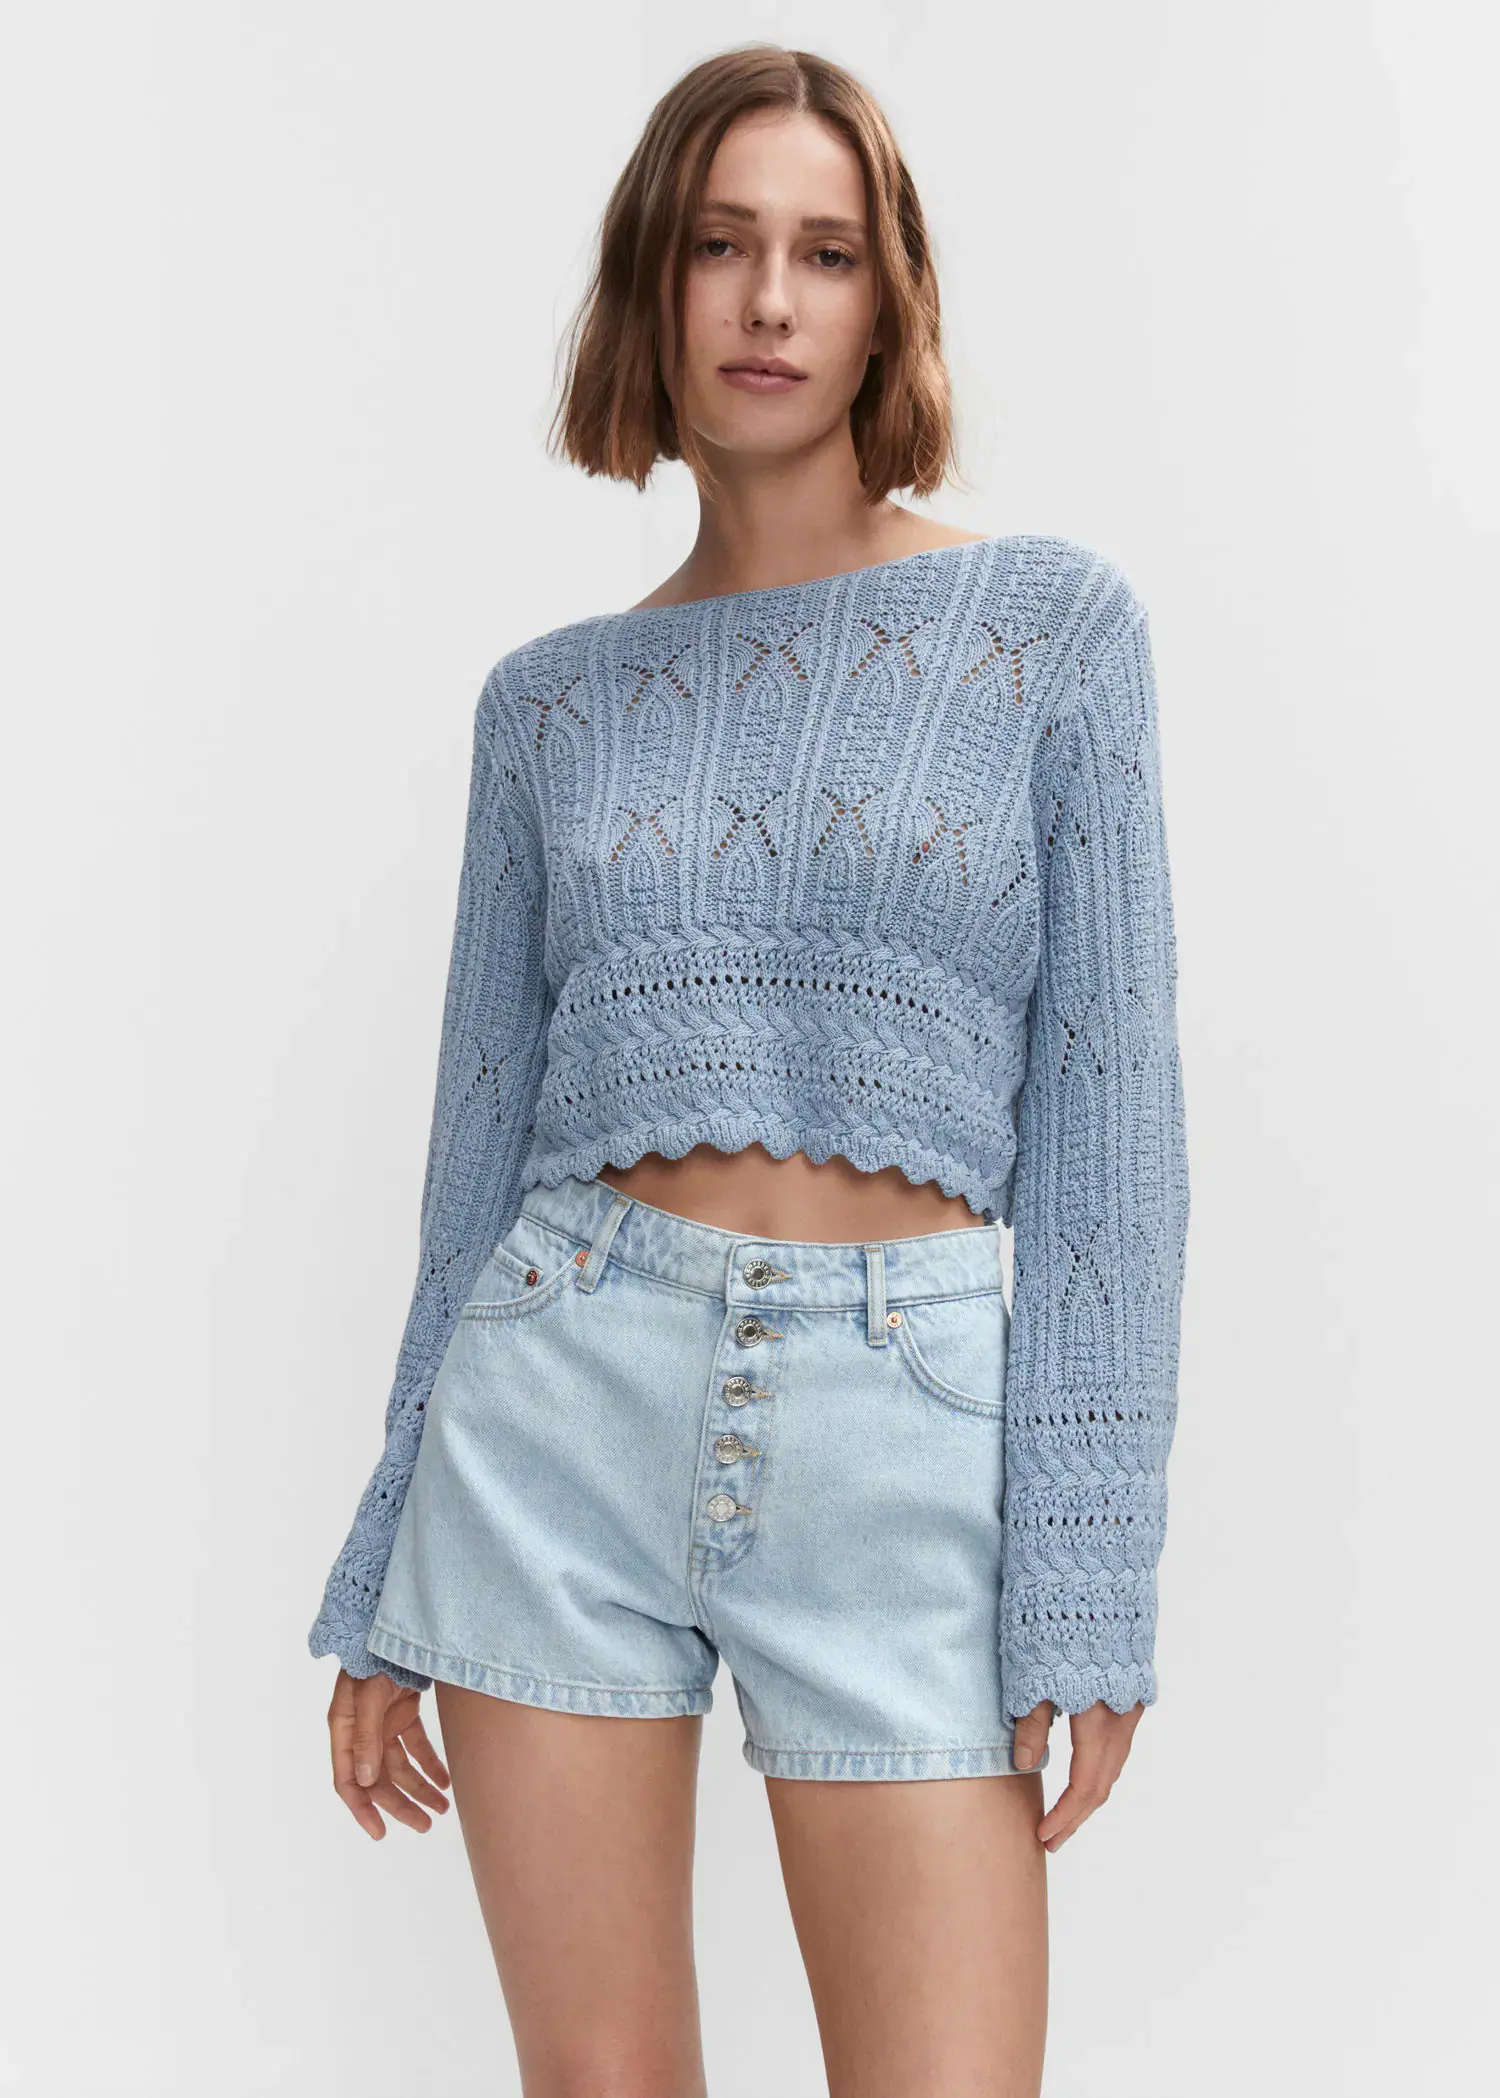 Mango Denim shorts with buttons. a woman in a light blue sweater and light blue denim shorts. 